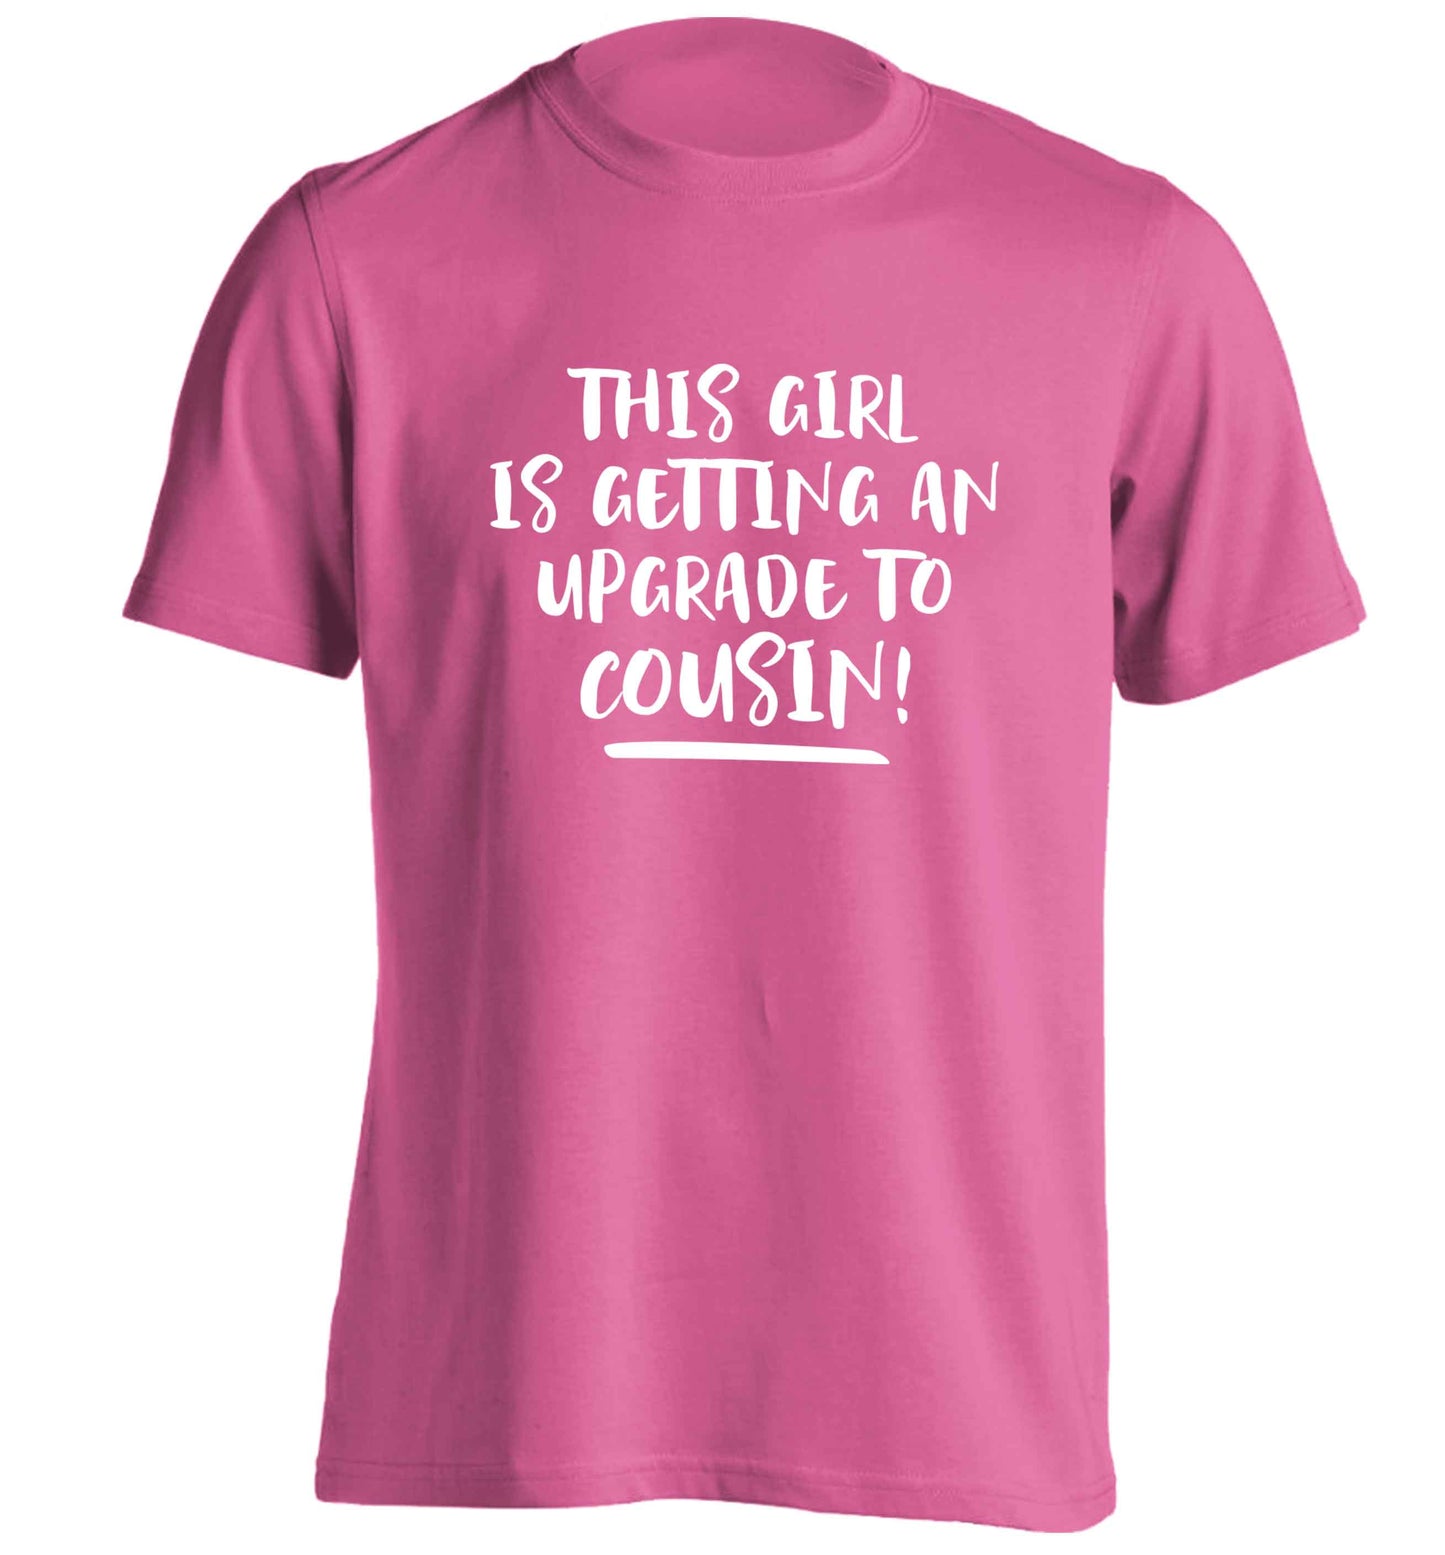 This girl is getting an upgrade to cousin! adults unisex pink Tshirt 2XL